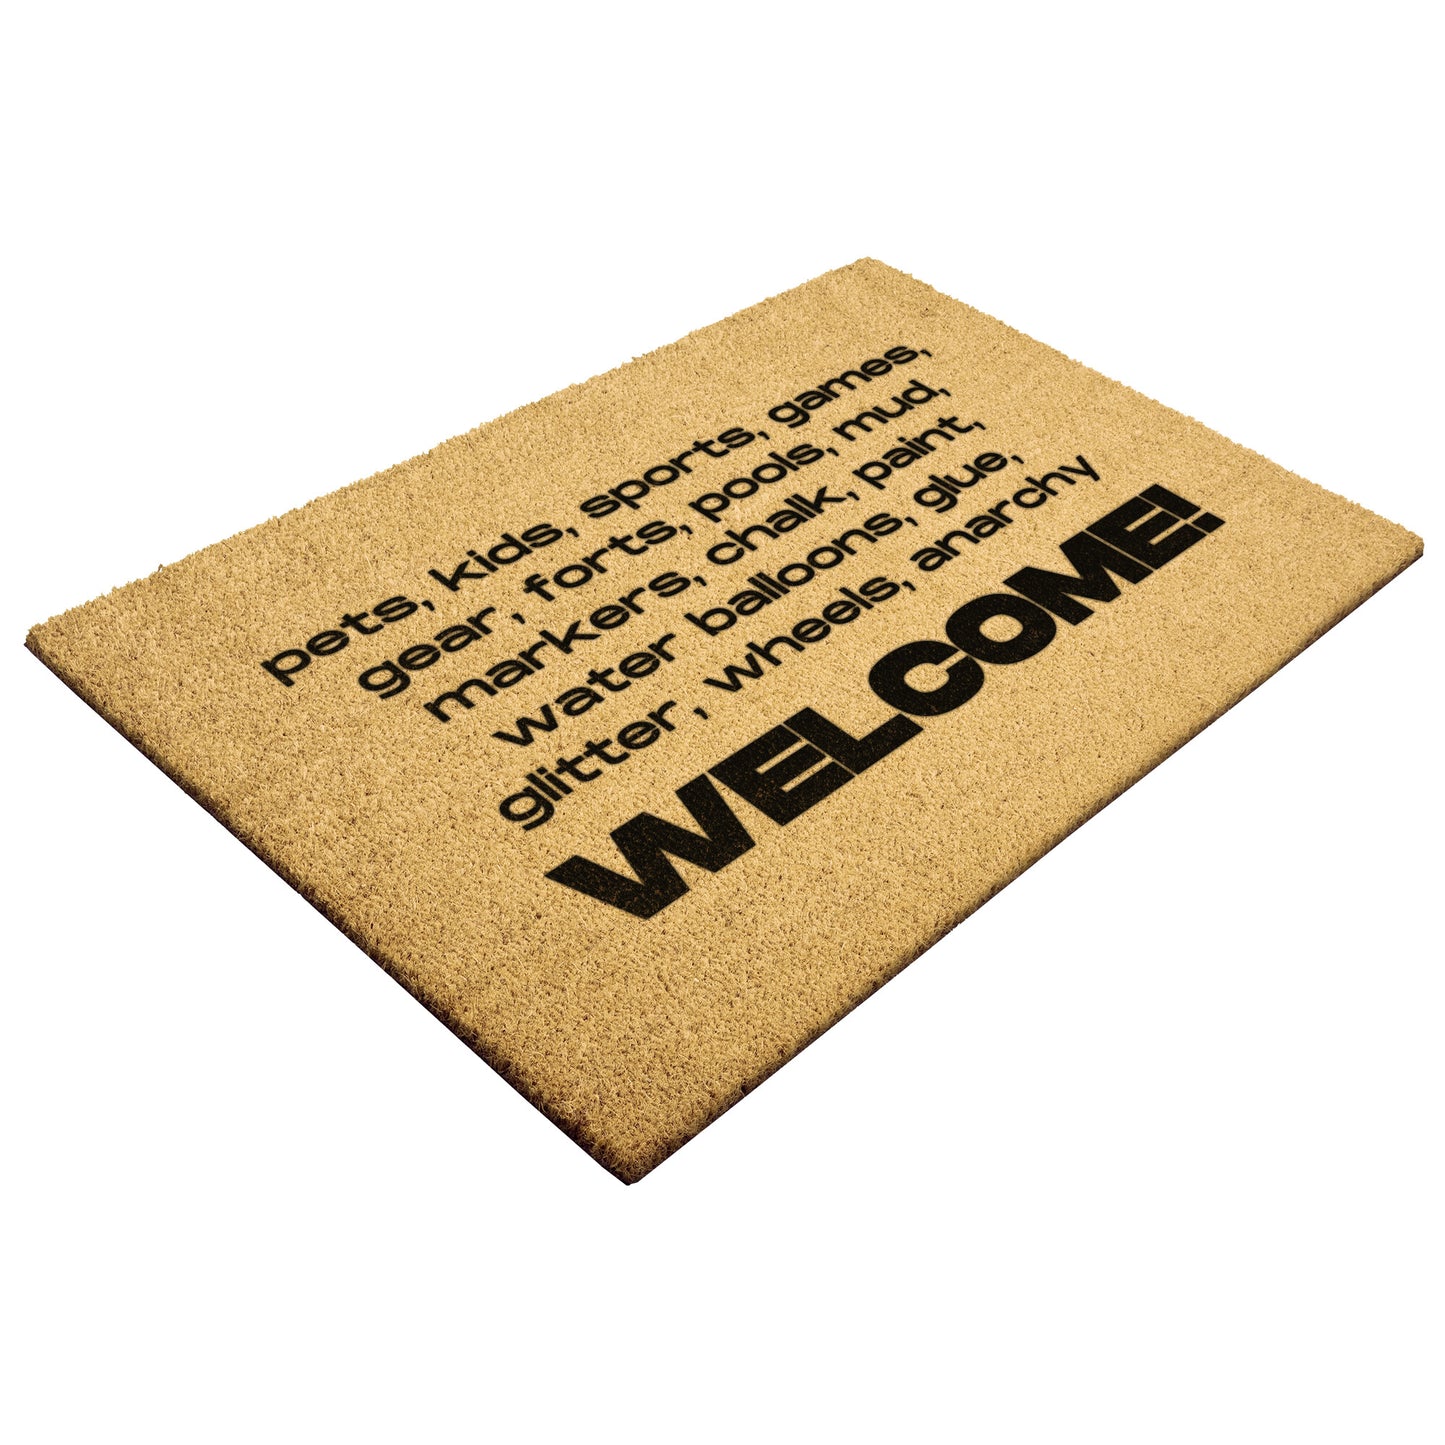 "Pets, Kids ... Anarchy" Welcome Mat